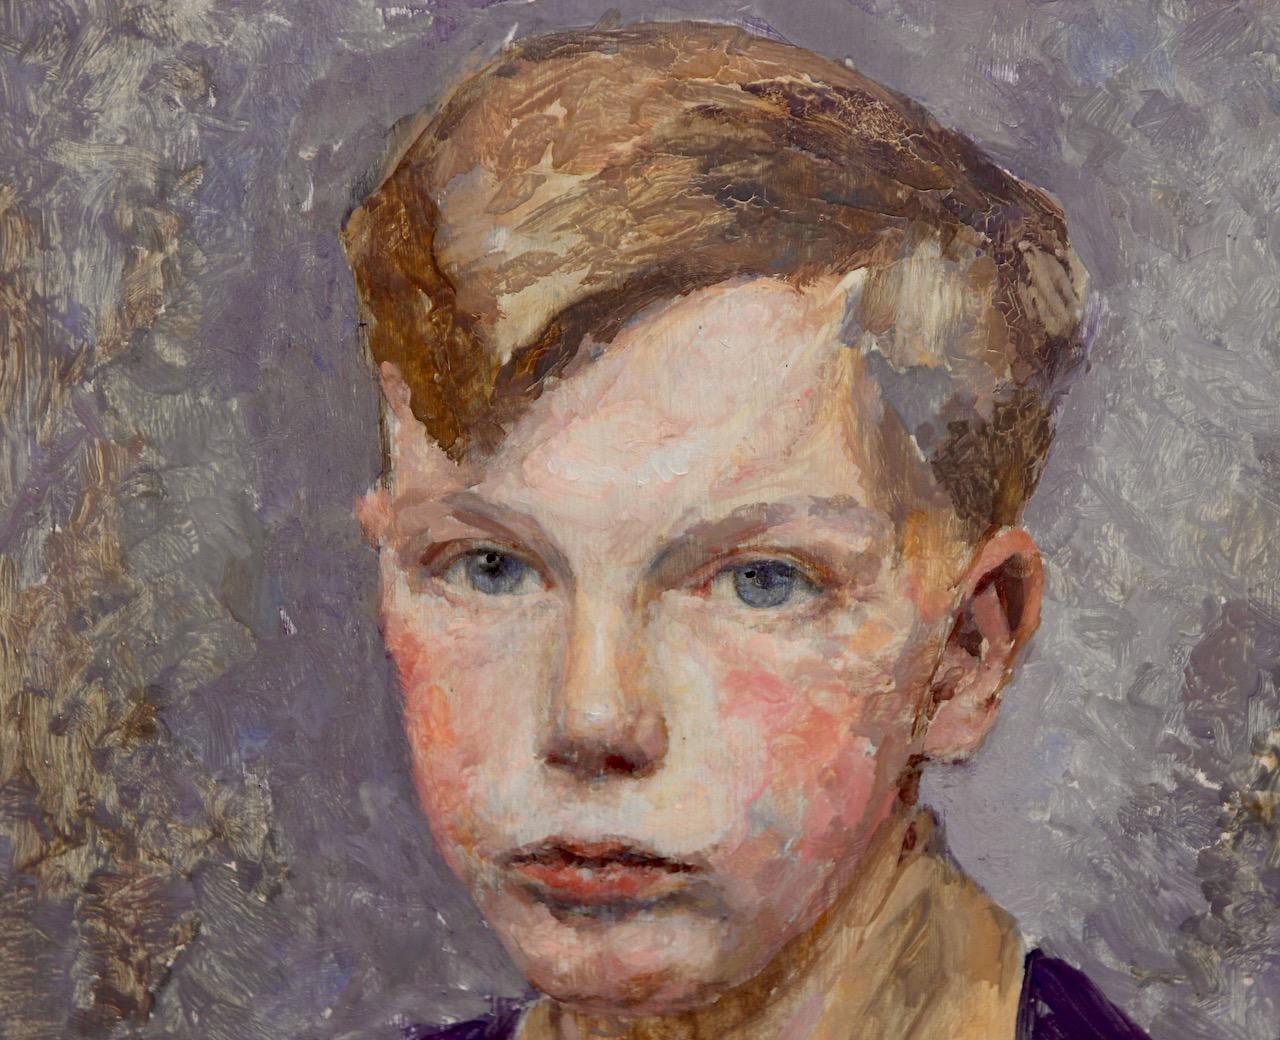 Portrait of a young boy, impressionist painting.

Dimensions WITHOUT frame in cm 32 x 42